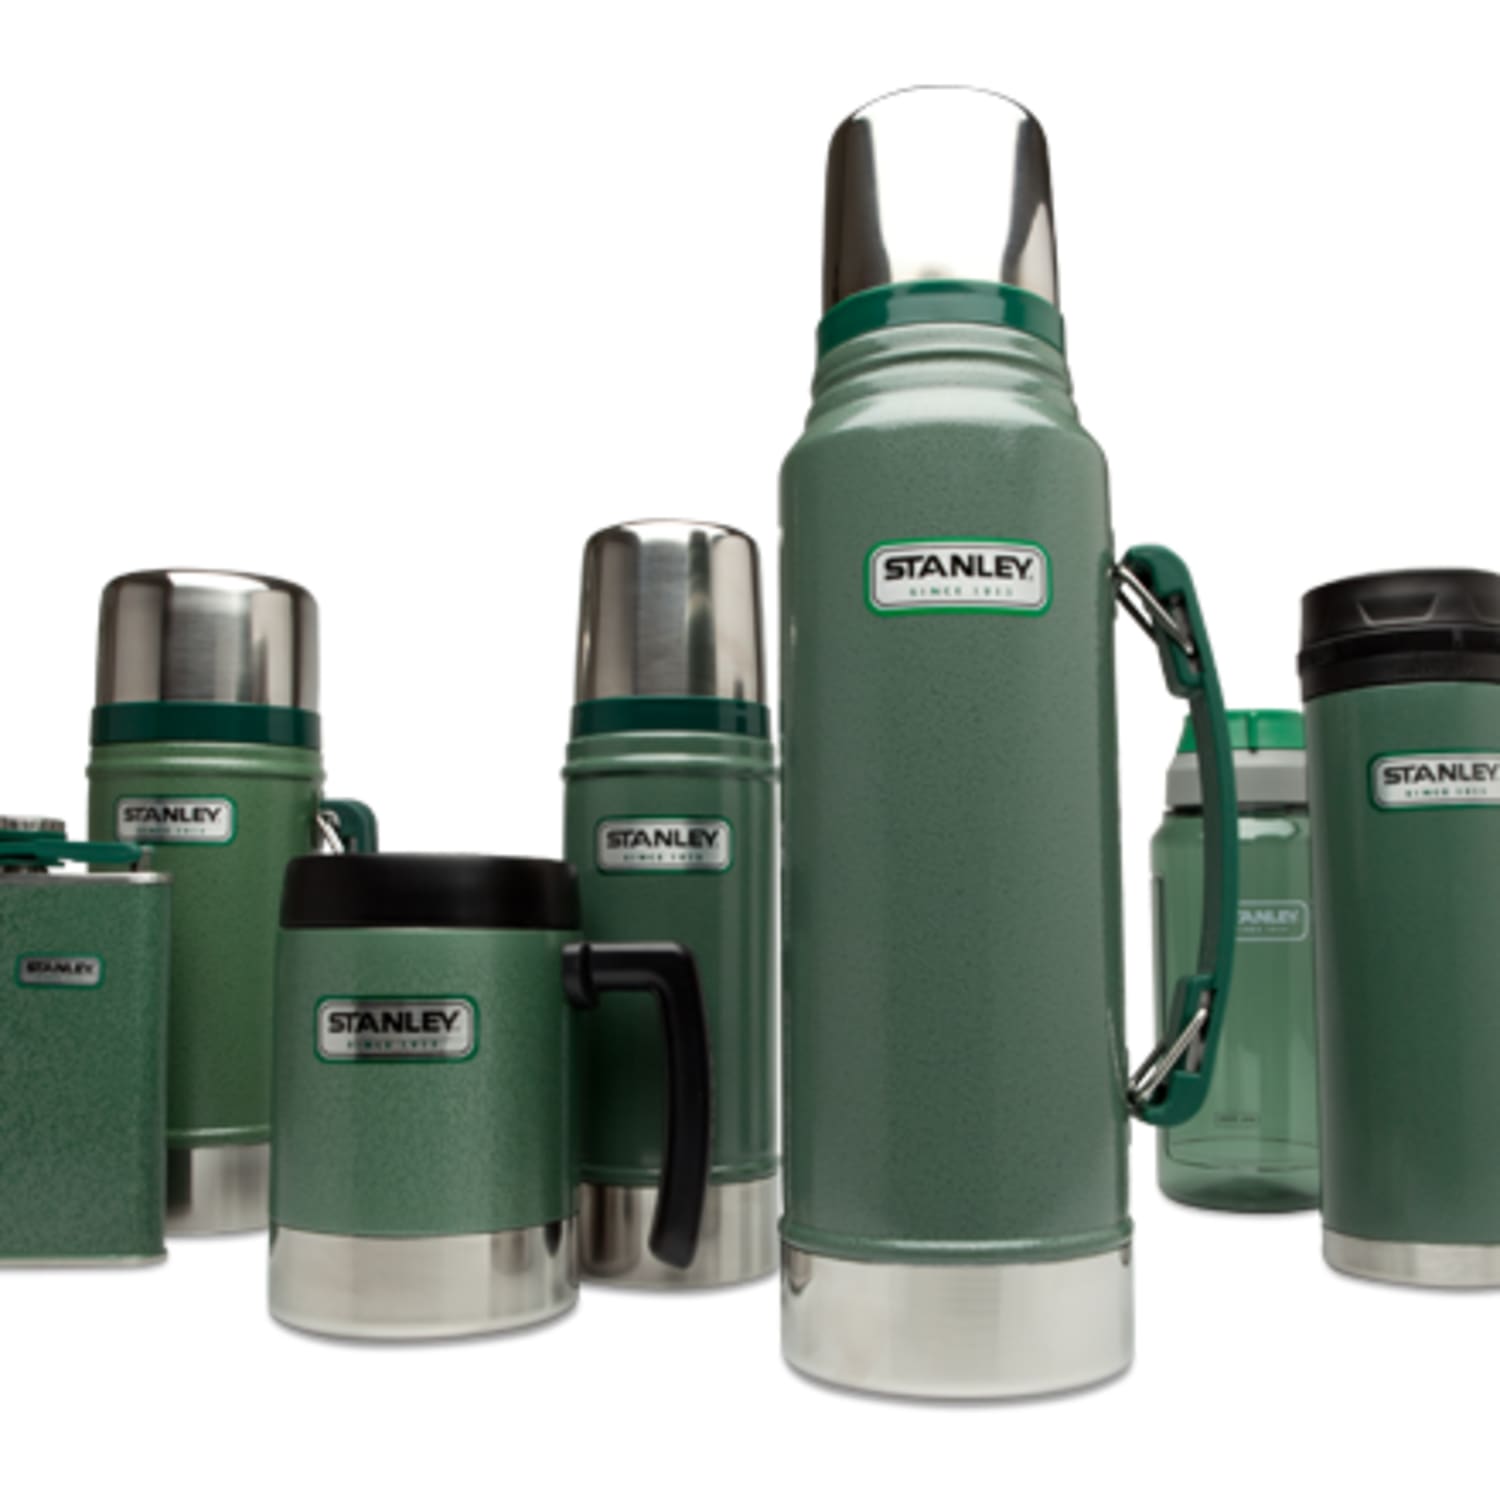 Stanley's iconic camping gear, vacuum bottles, more on sale from $8.50 today